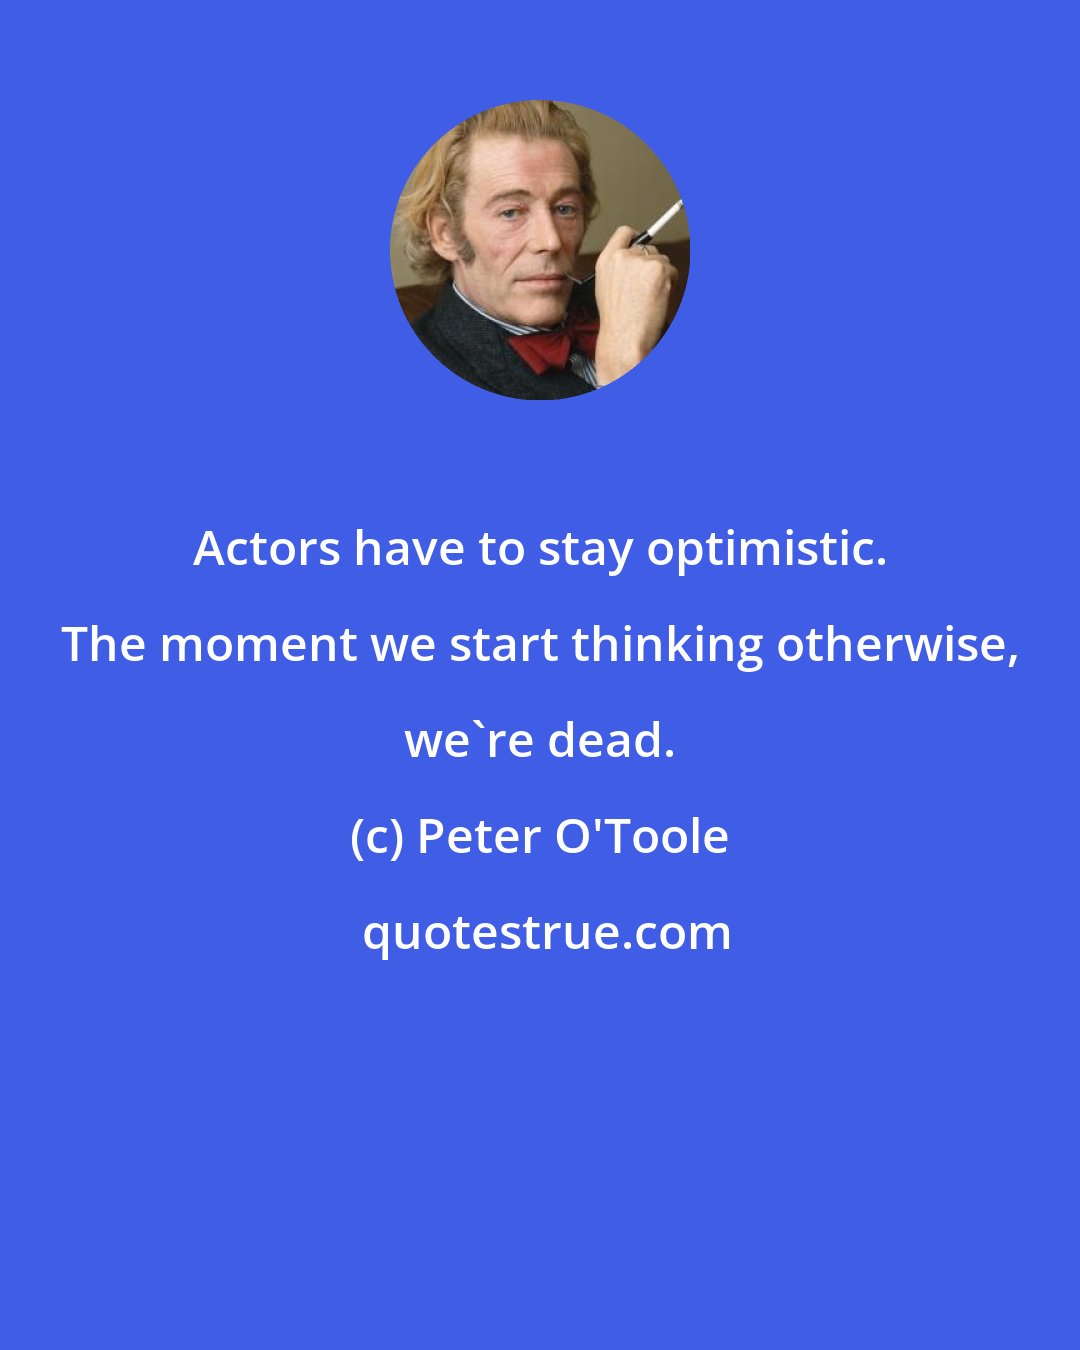 Peter O'Toole: Actors have to stay optimistic. The moment we start thinking otherwise, we're dead.